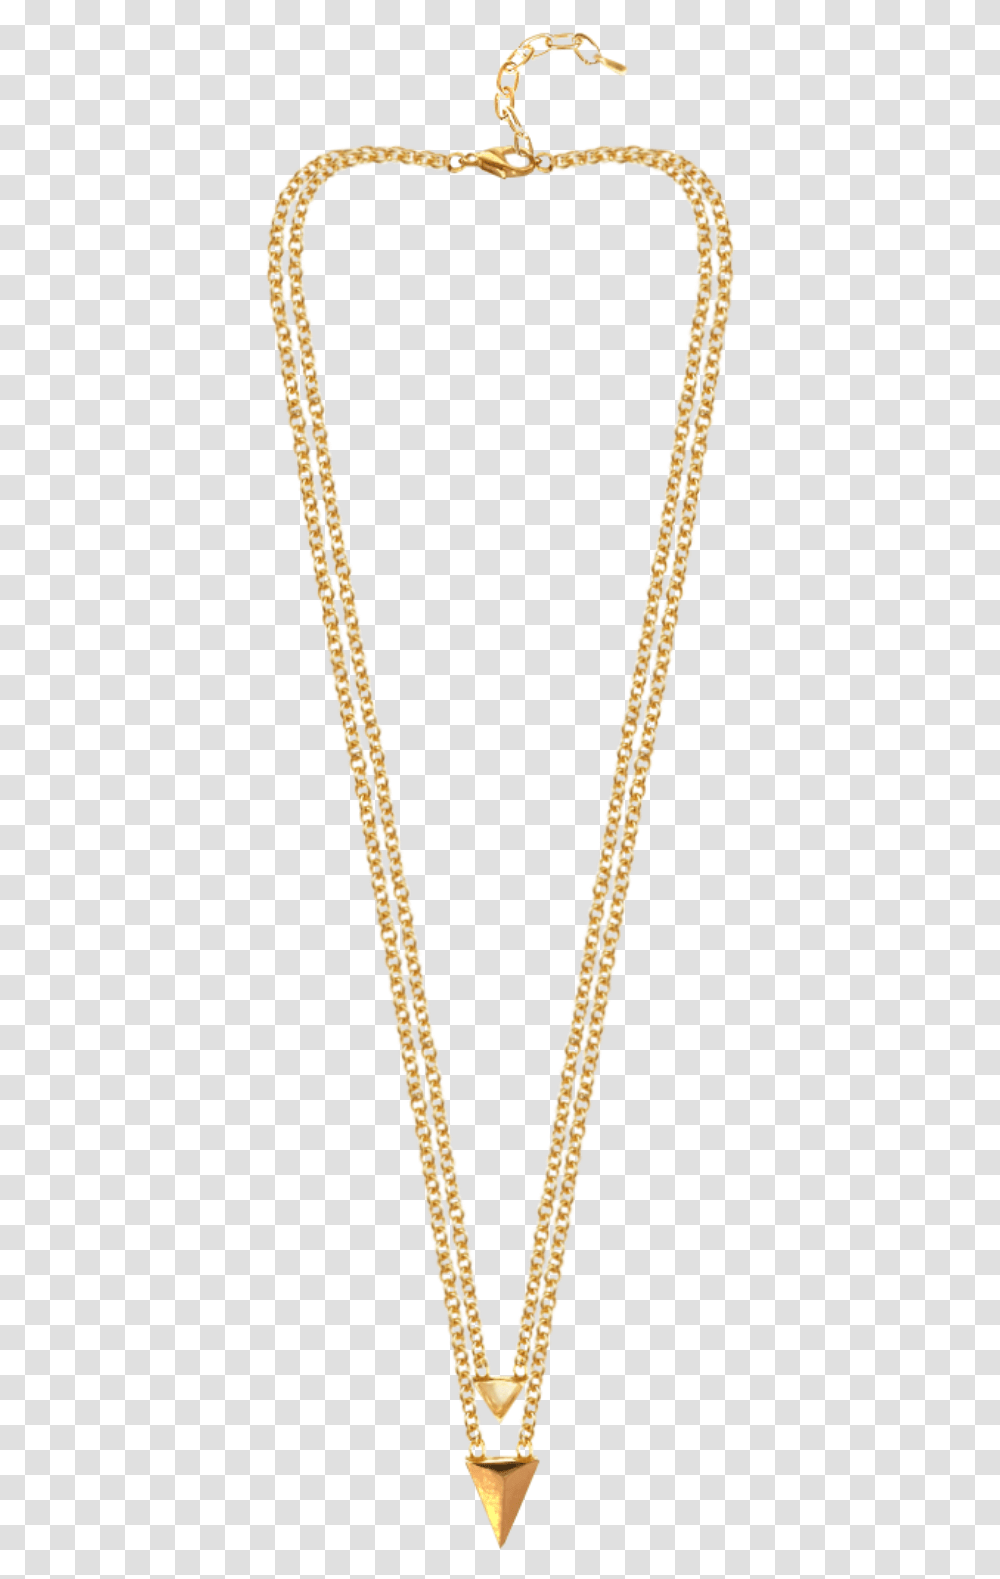 Taylor Bohemian Chevron Necklace Chain, Jewelry, Accessories, Accessory, Gold Transparent Png